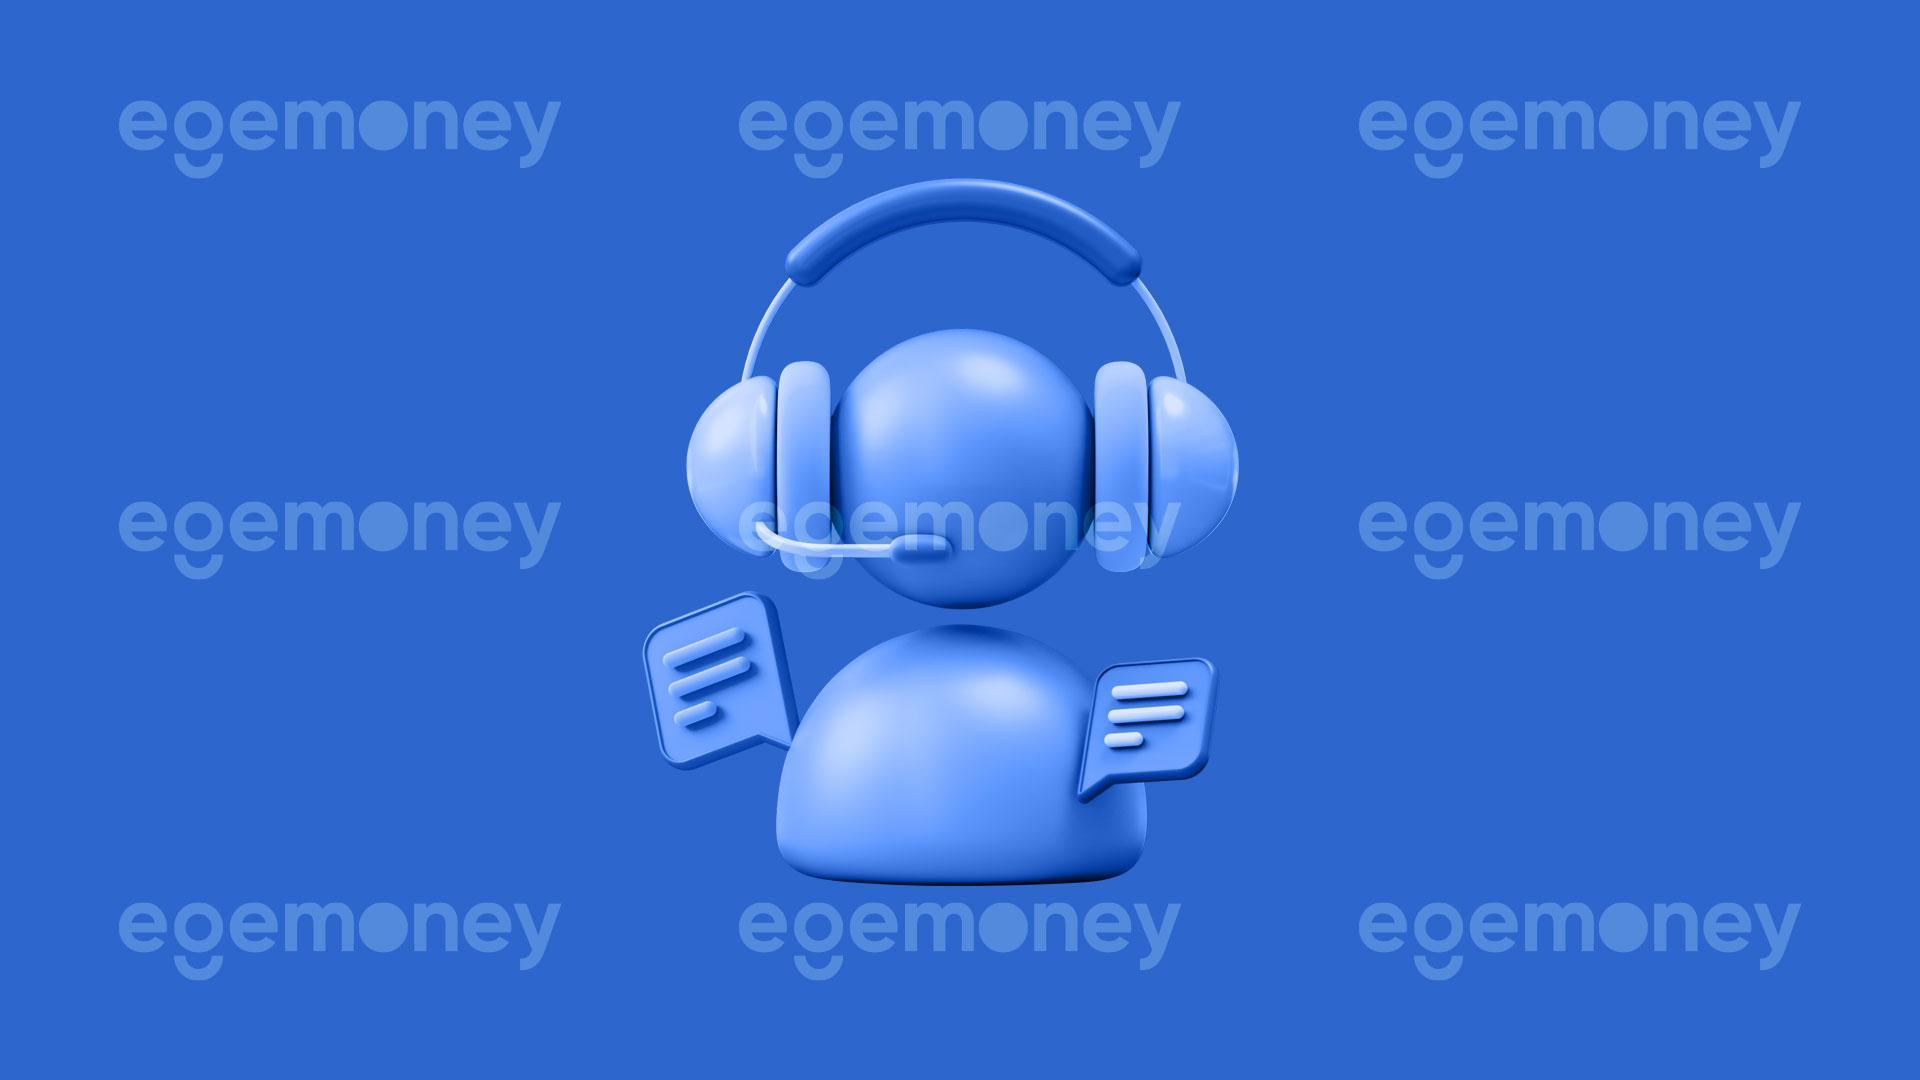 What Are The EgeMoney Support Channels?